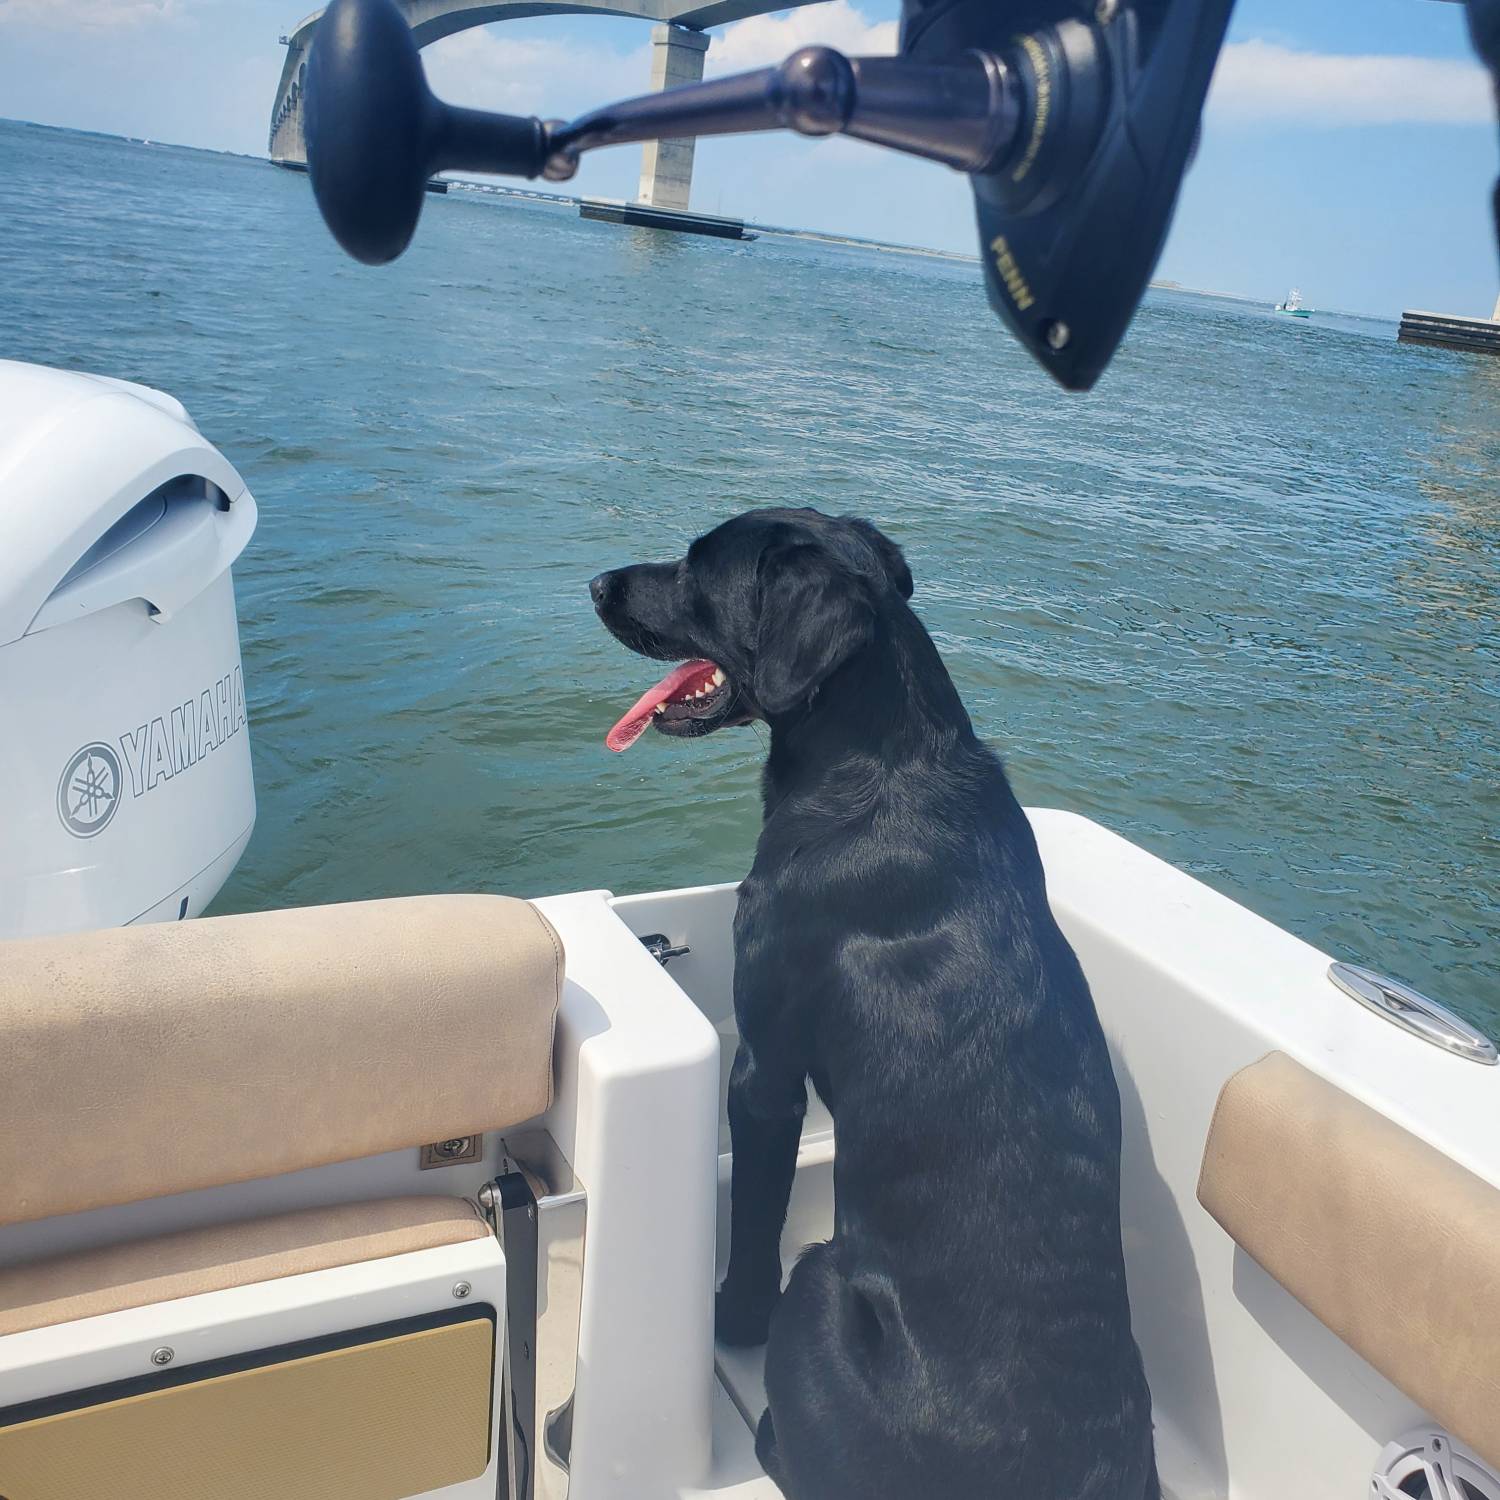 Title: Rowdy keeping an eye out for the fish 🐟 - On board their Sportsman Open 232 Center Console - Location: Oregon Inlet, NC. Participating in the Photo Contest #SportsmanOctober